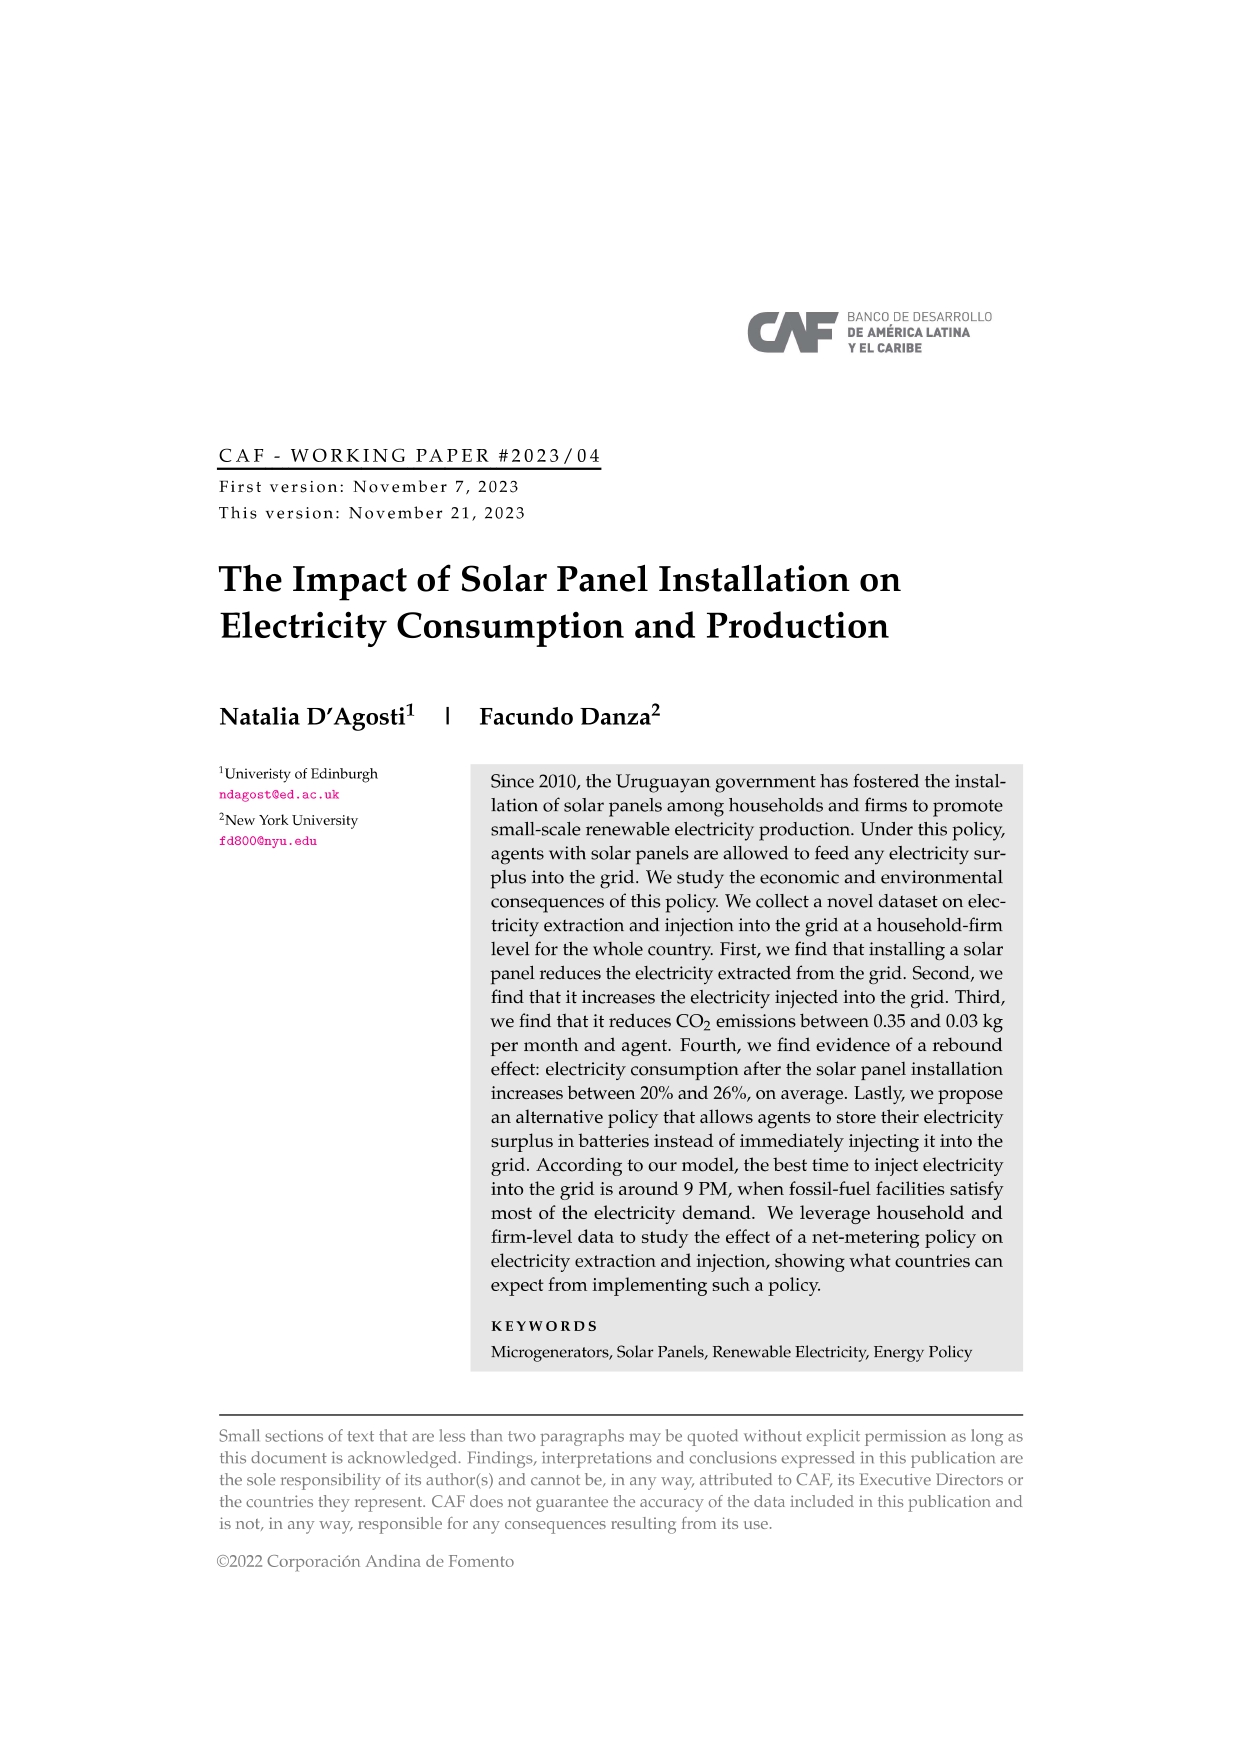 The Impact of Solar Panel Installation on Electricity Consumption and Production